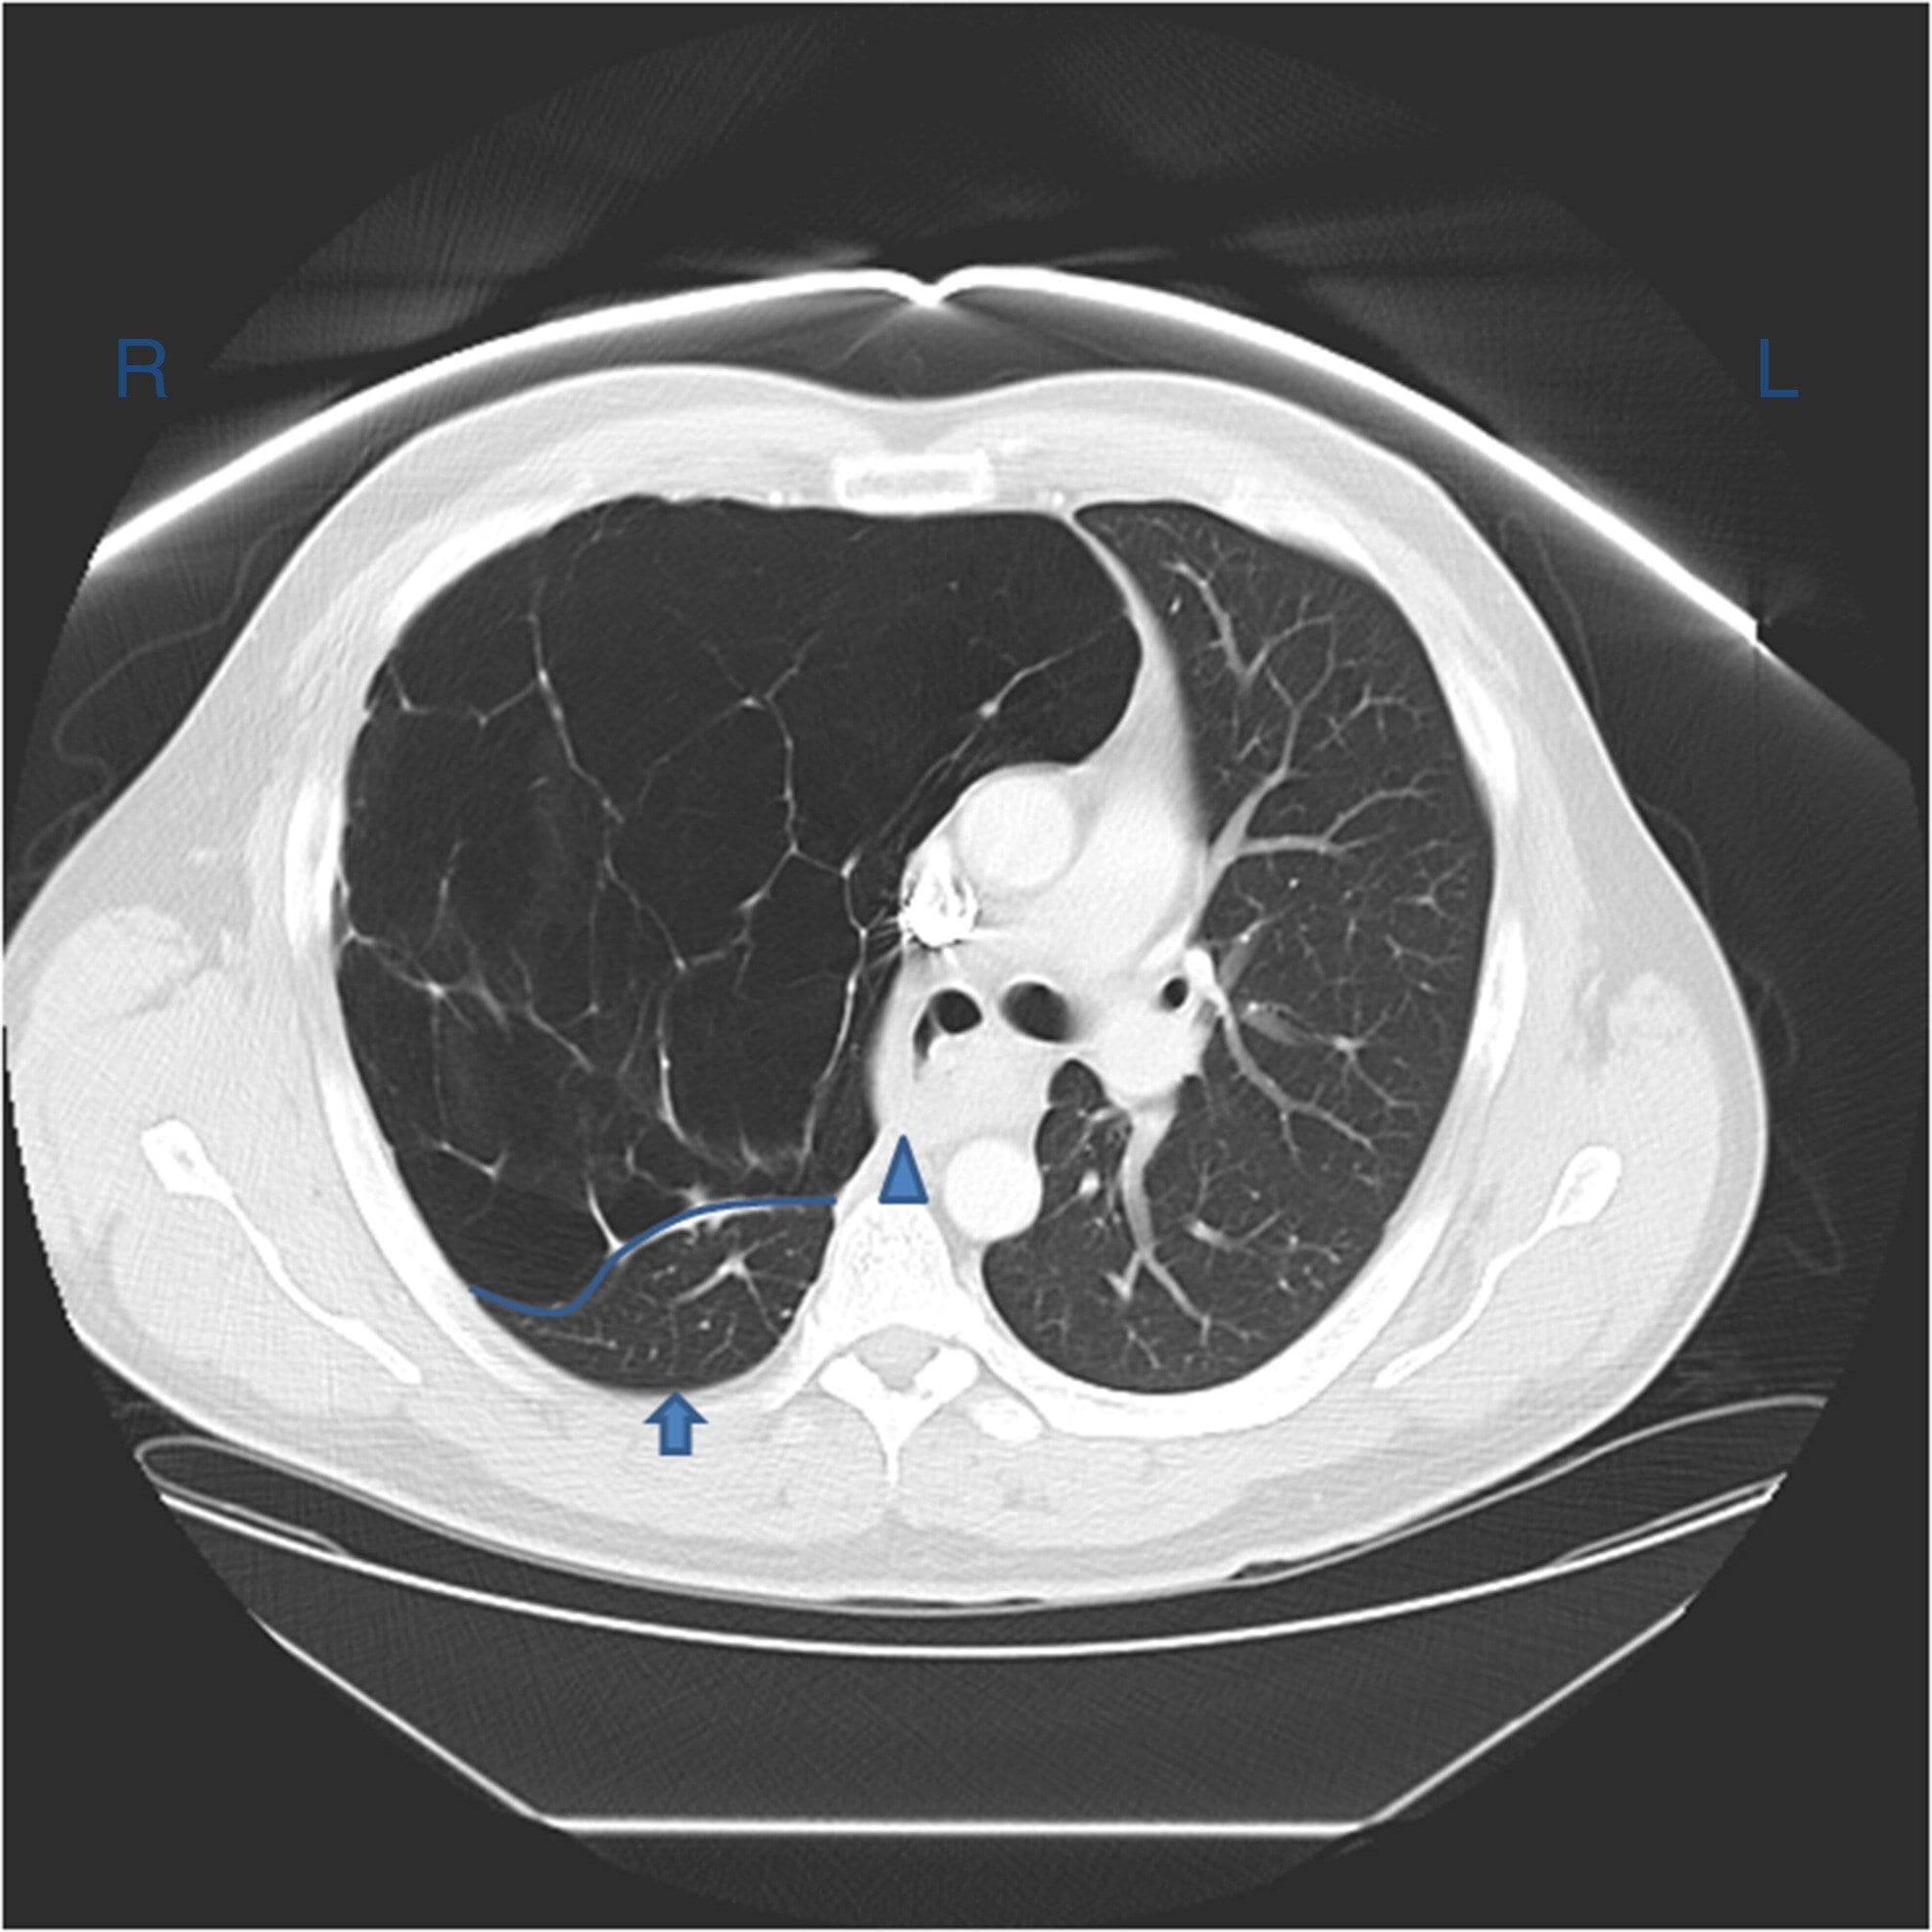 Chest computed tomography showing extensive emphysema in the right middle lobe and compressive atelectasis of the right upper lobe